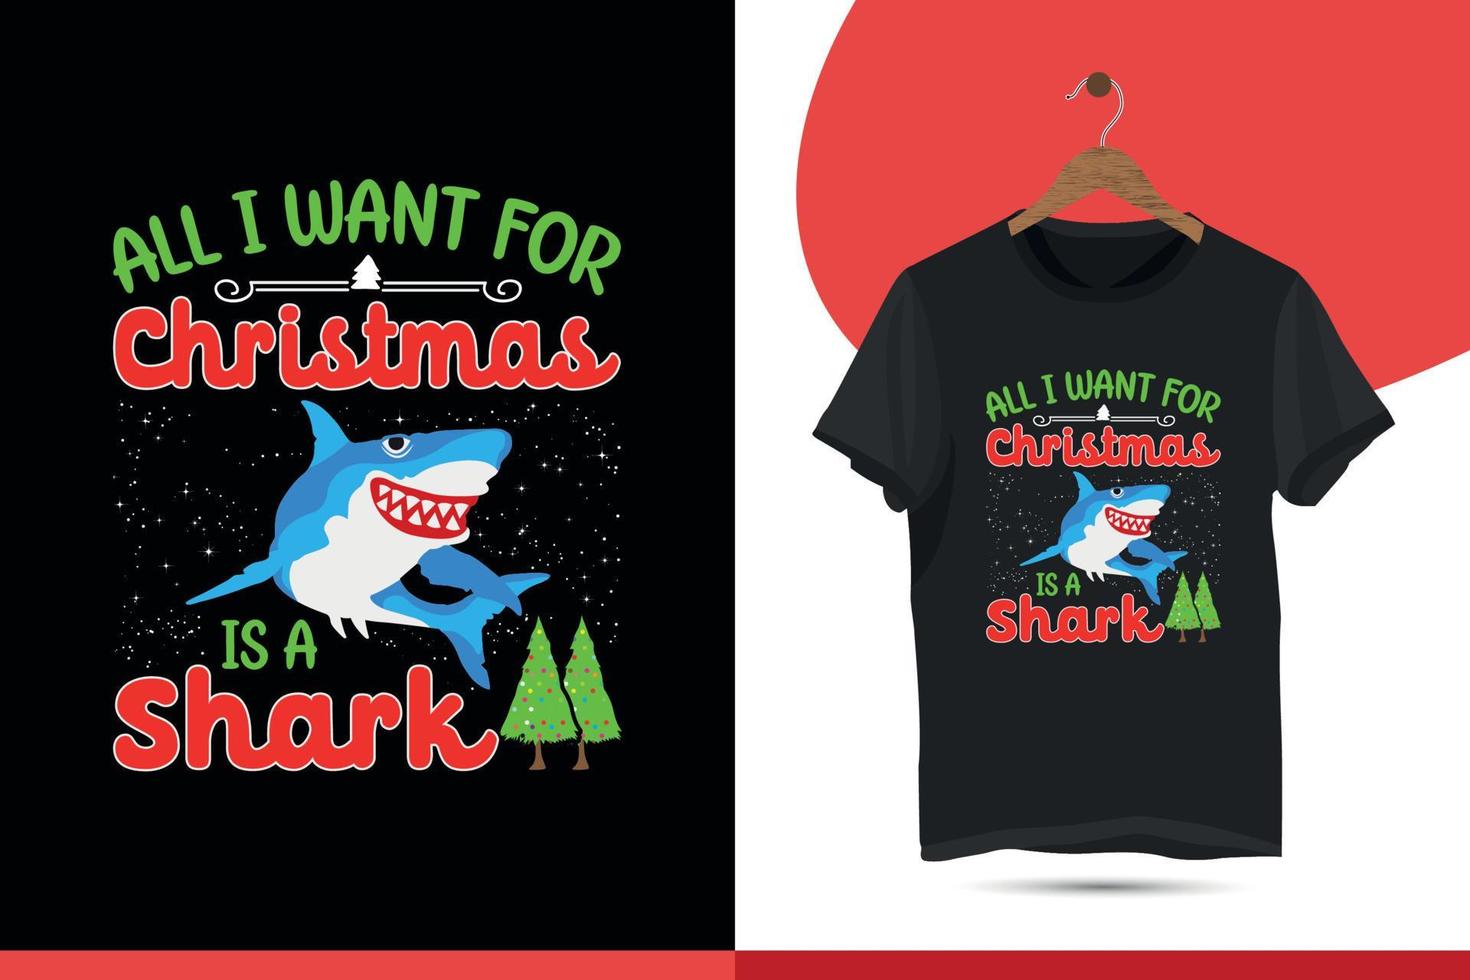 All I want for Christmas is a shark. Christmas T-shirt Design for Fishing. Funny Fishing Shirt, Vector T-Shirt Design Template for Print.